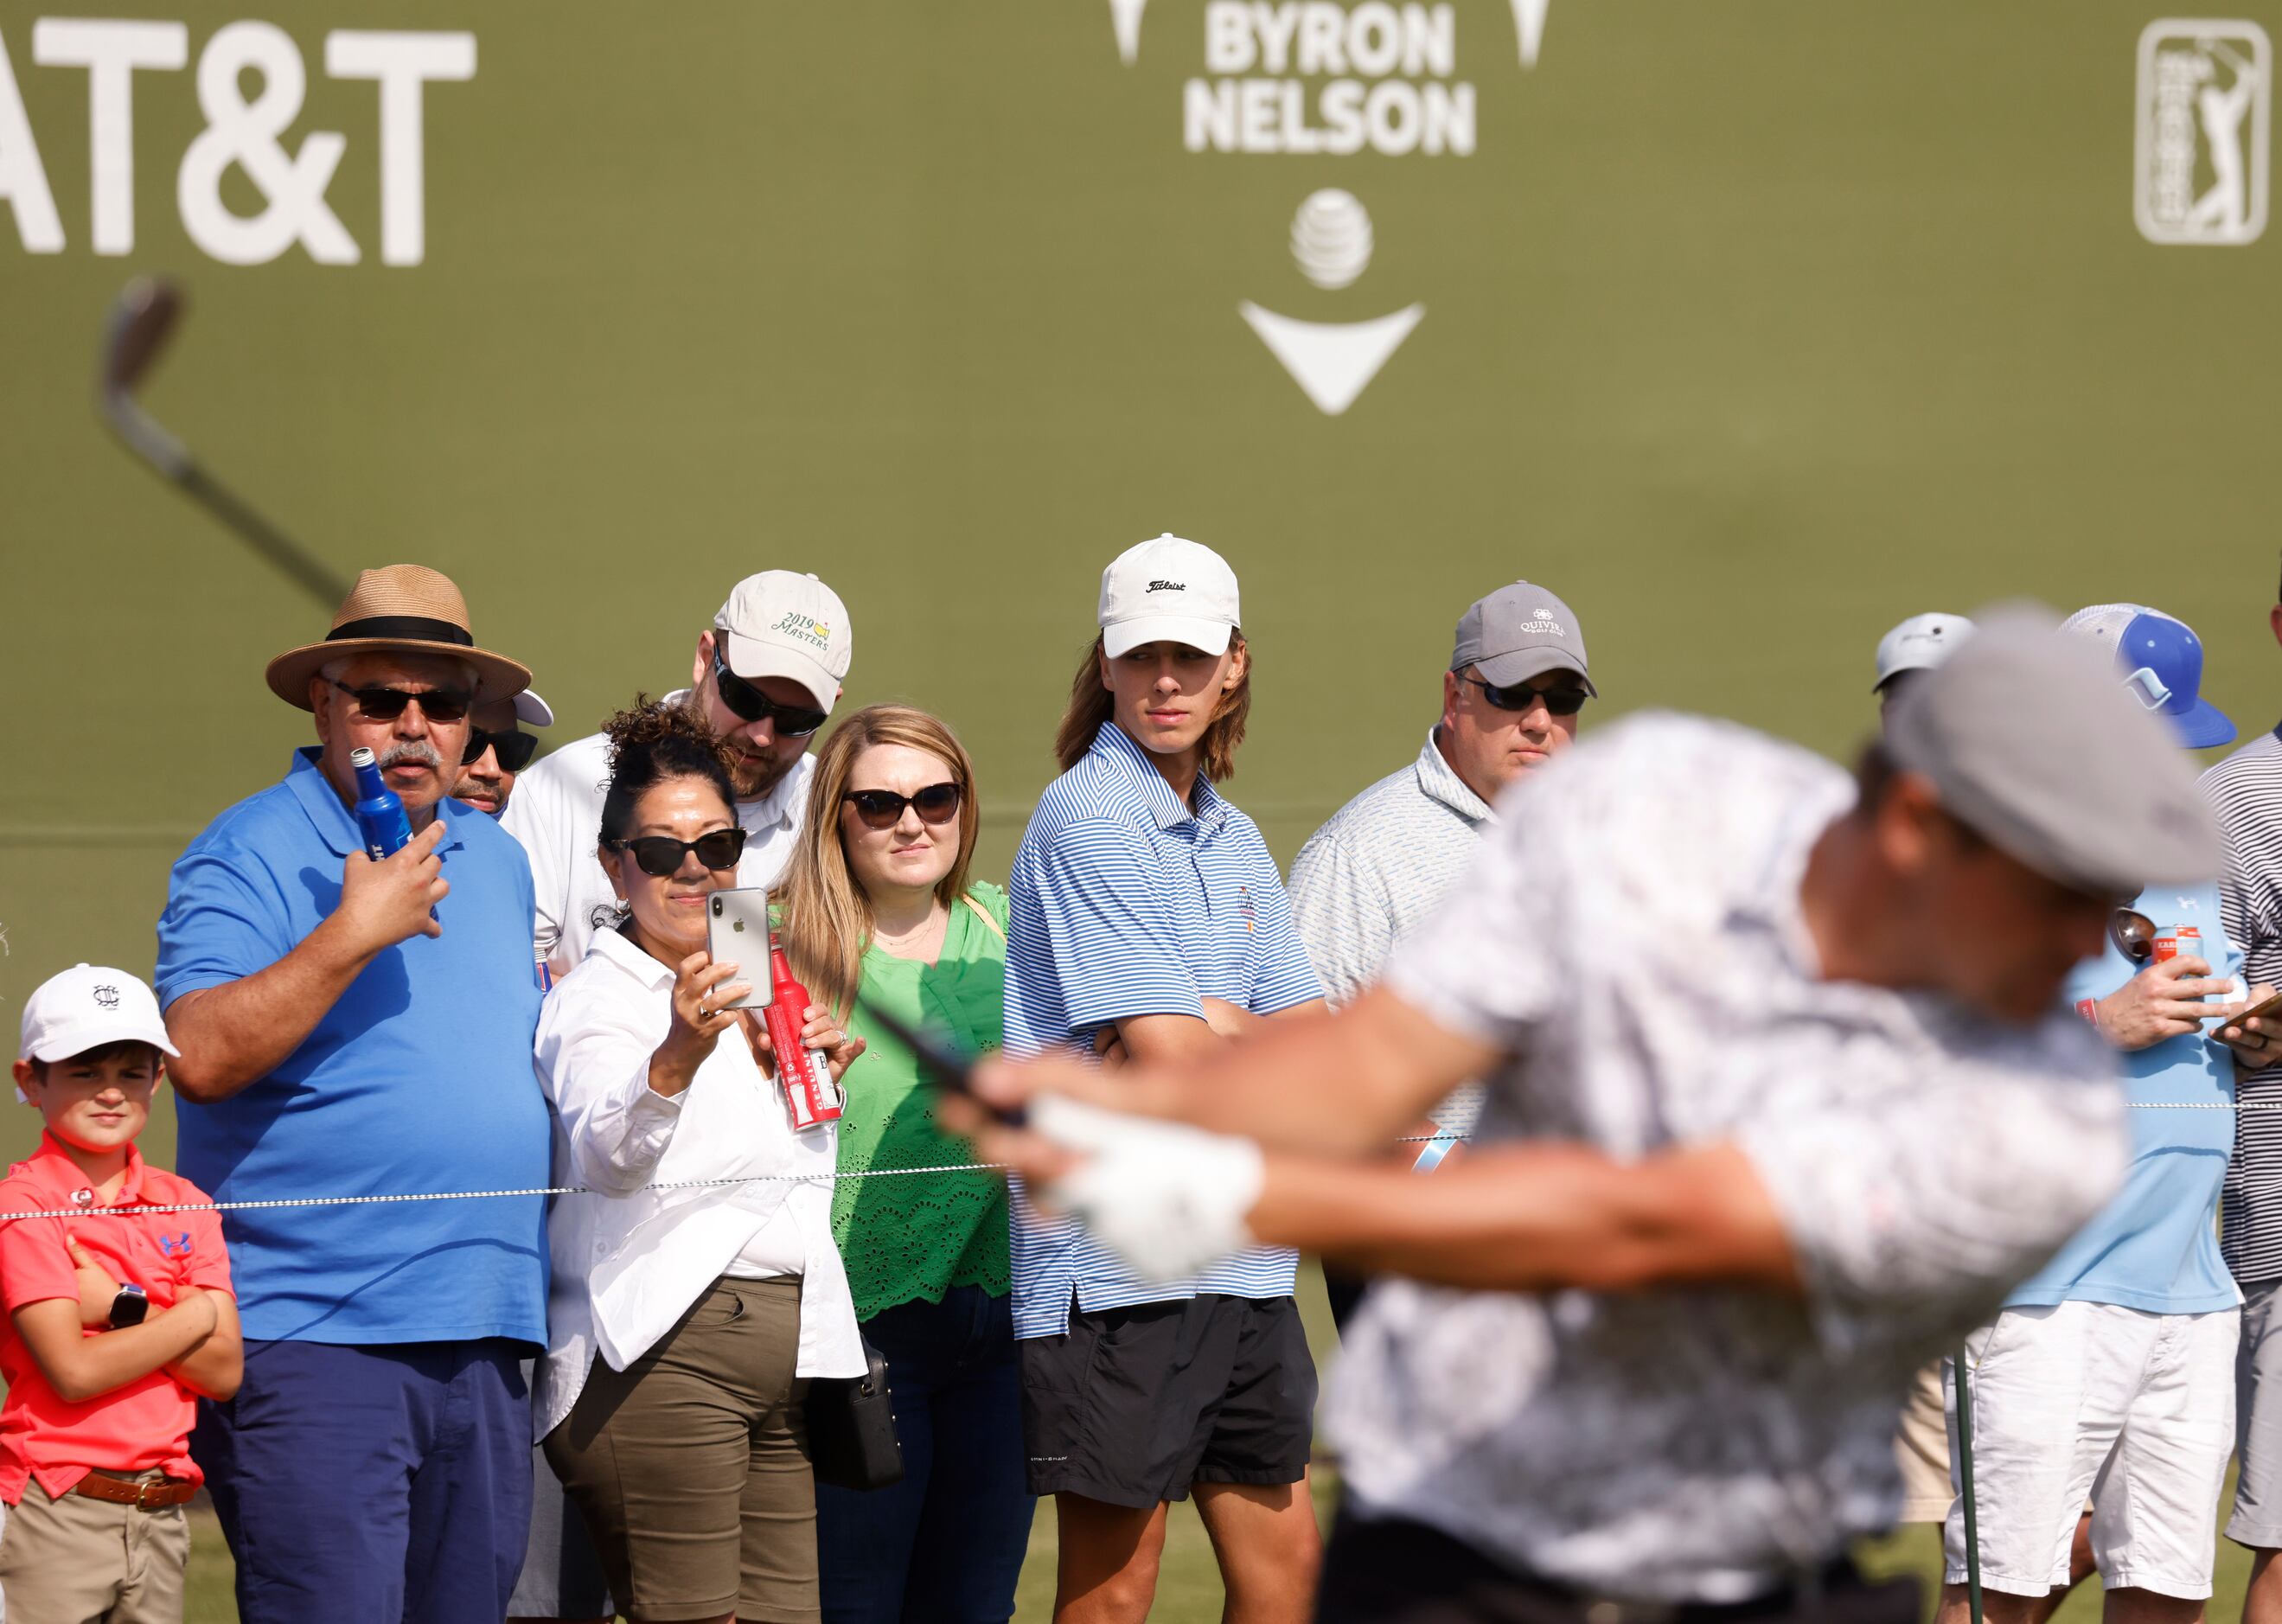 Fans watch as Bryson DeChambeau tees off on the 17th hole during round 2 of the AT&T Byron...